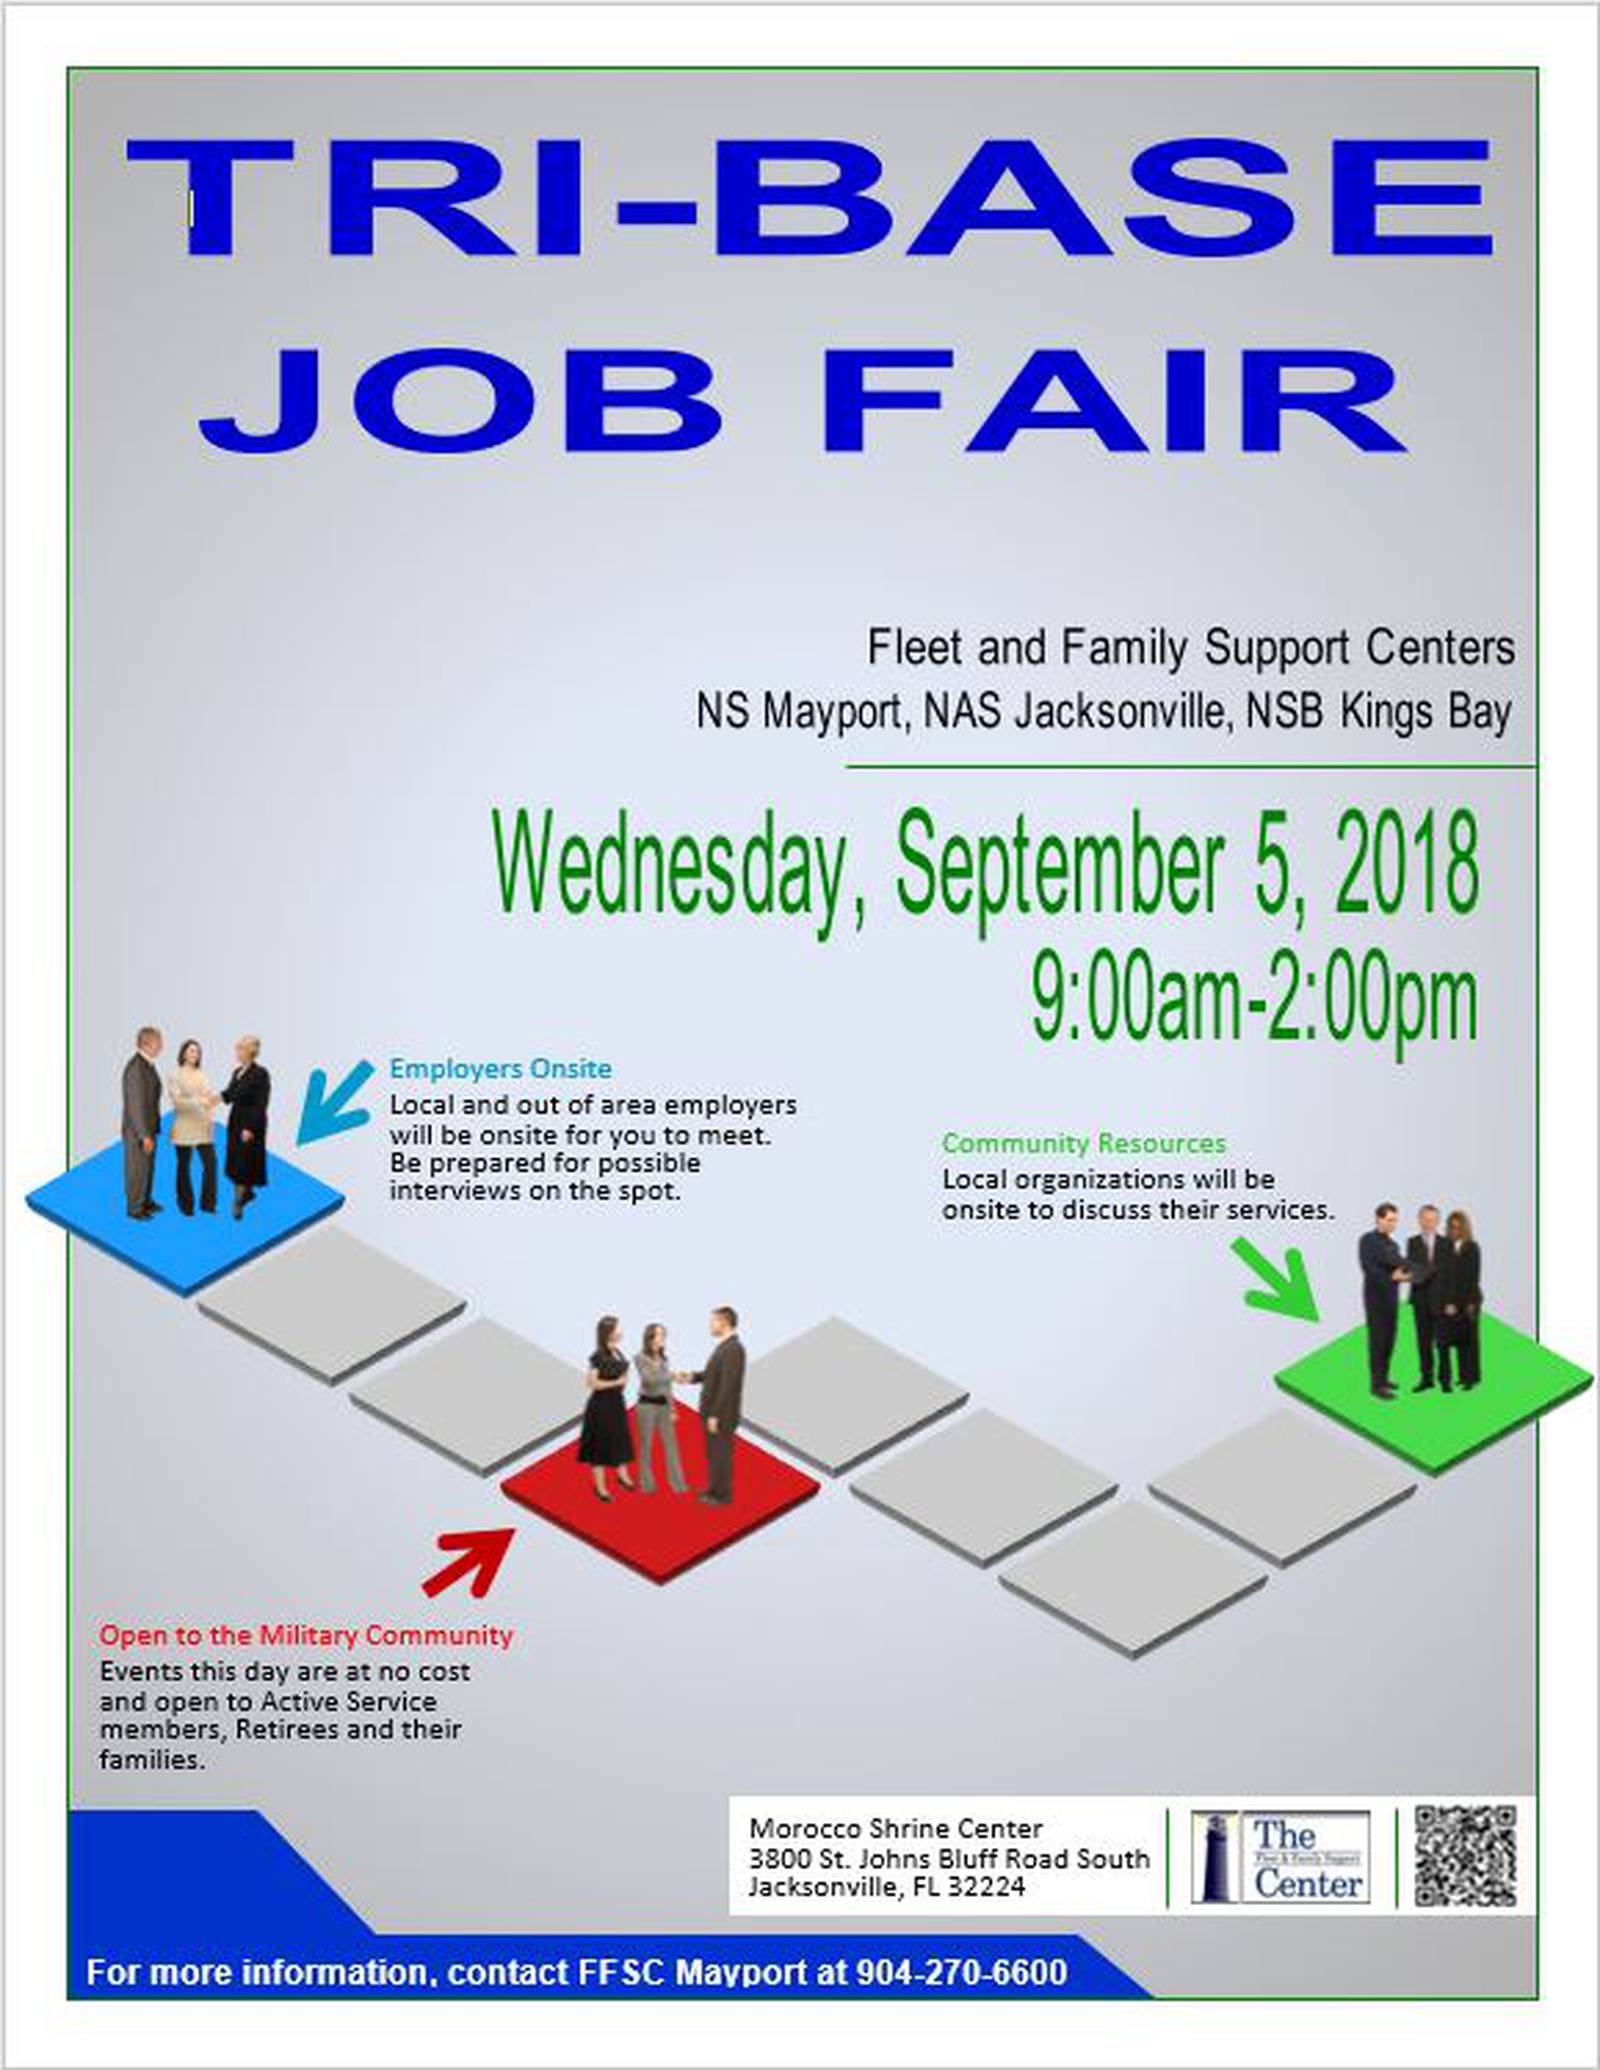 TriBase Job Fair open to all active duty, retired and DoD cardholders